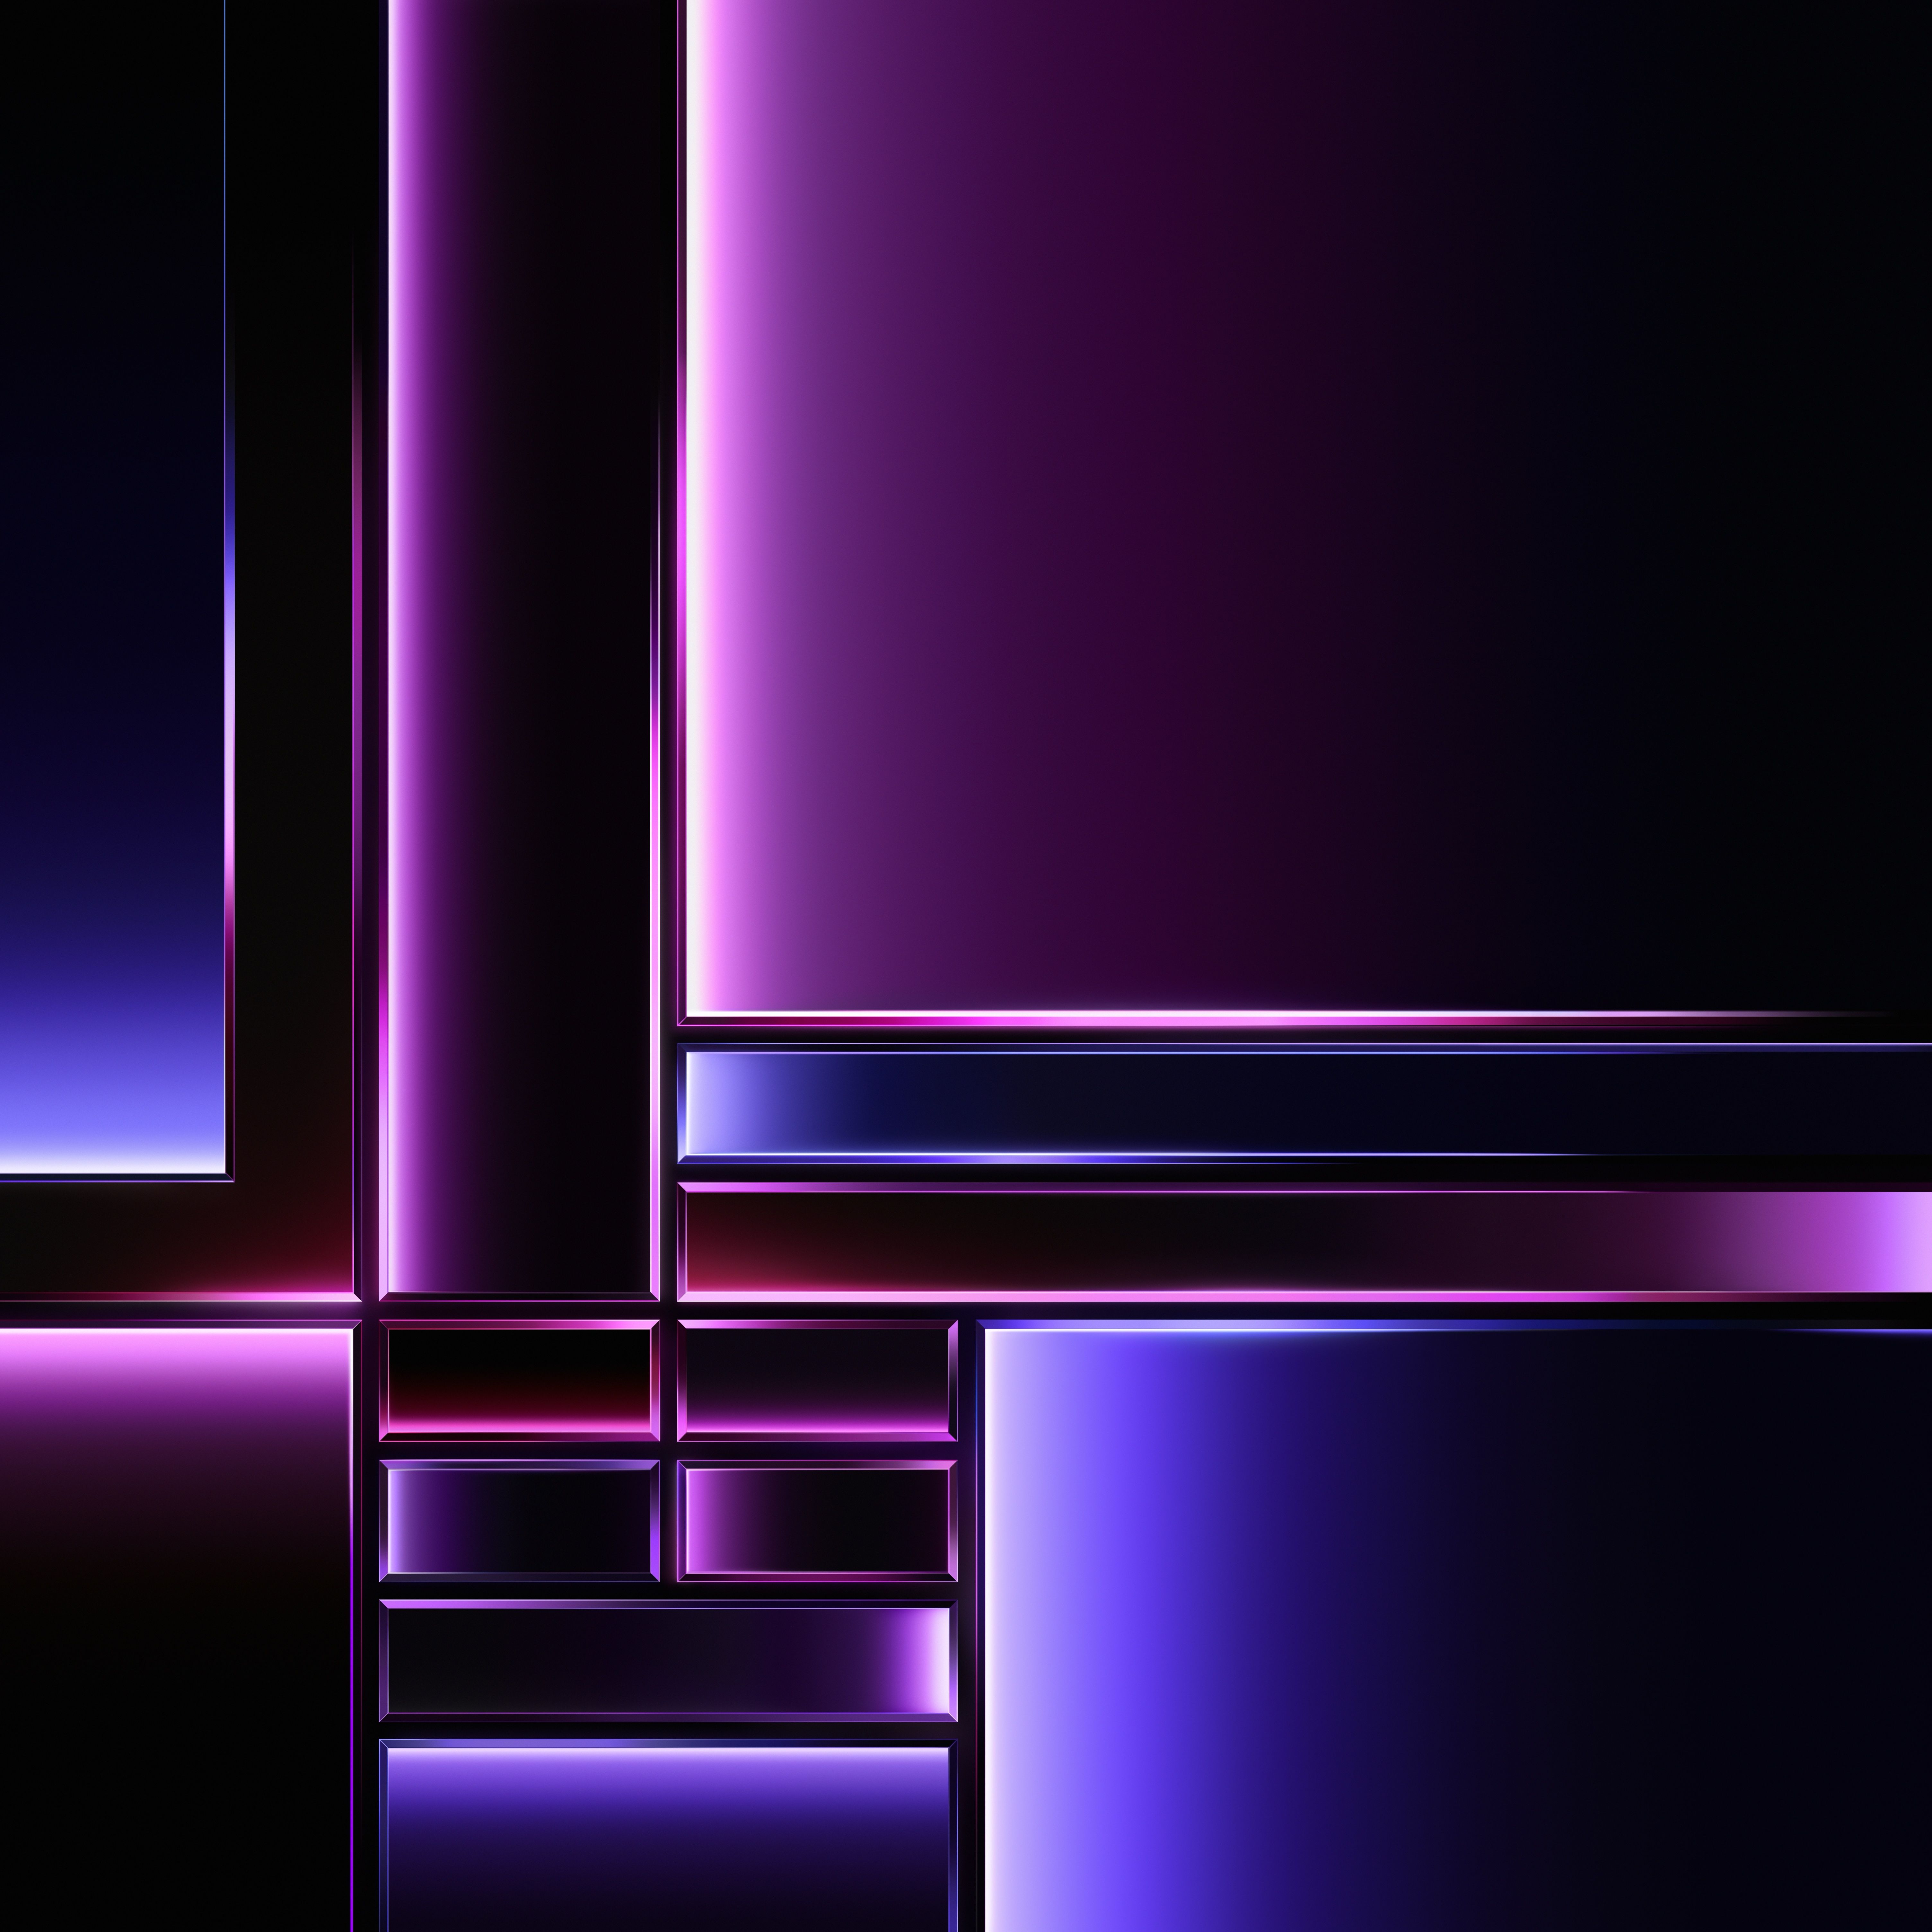 A purple and blue abstract wallpaper with a dark background - Magenta